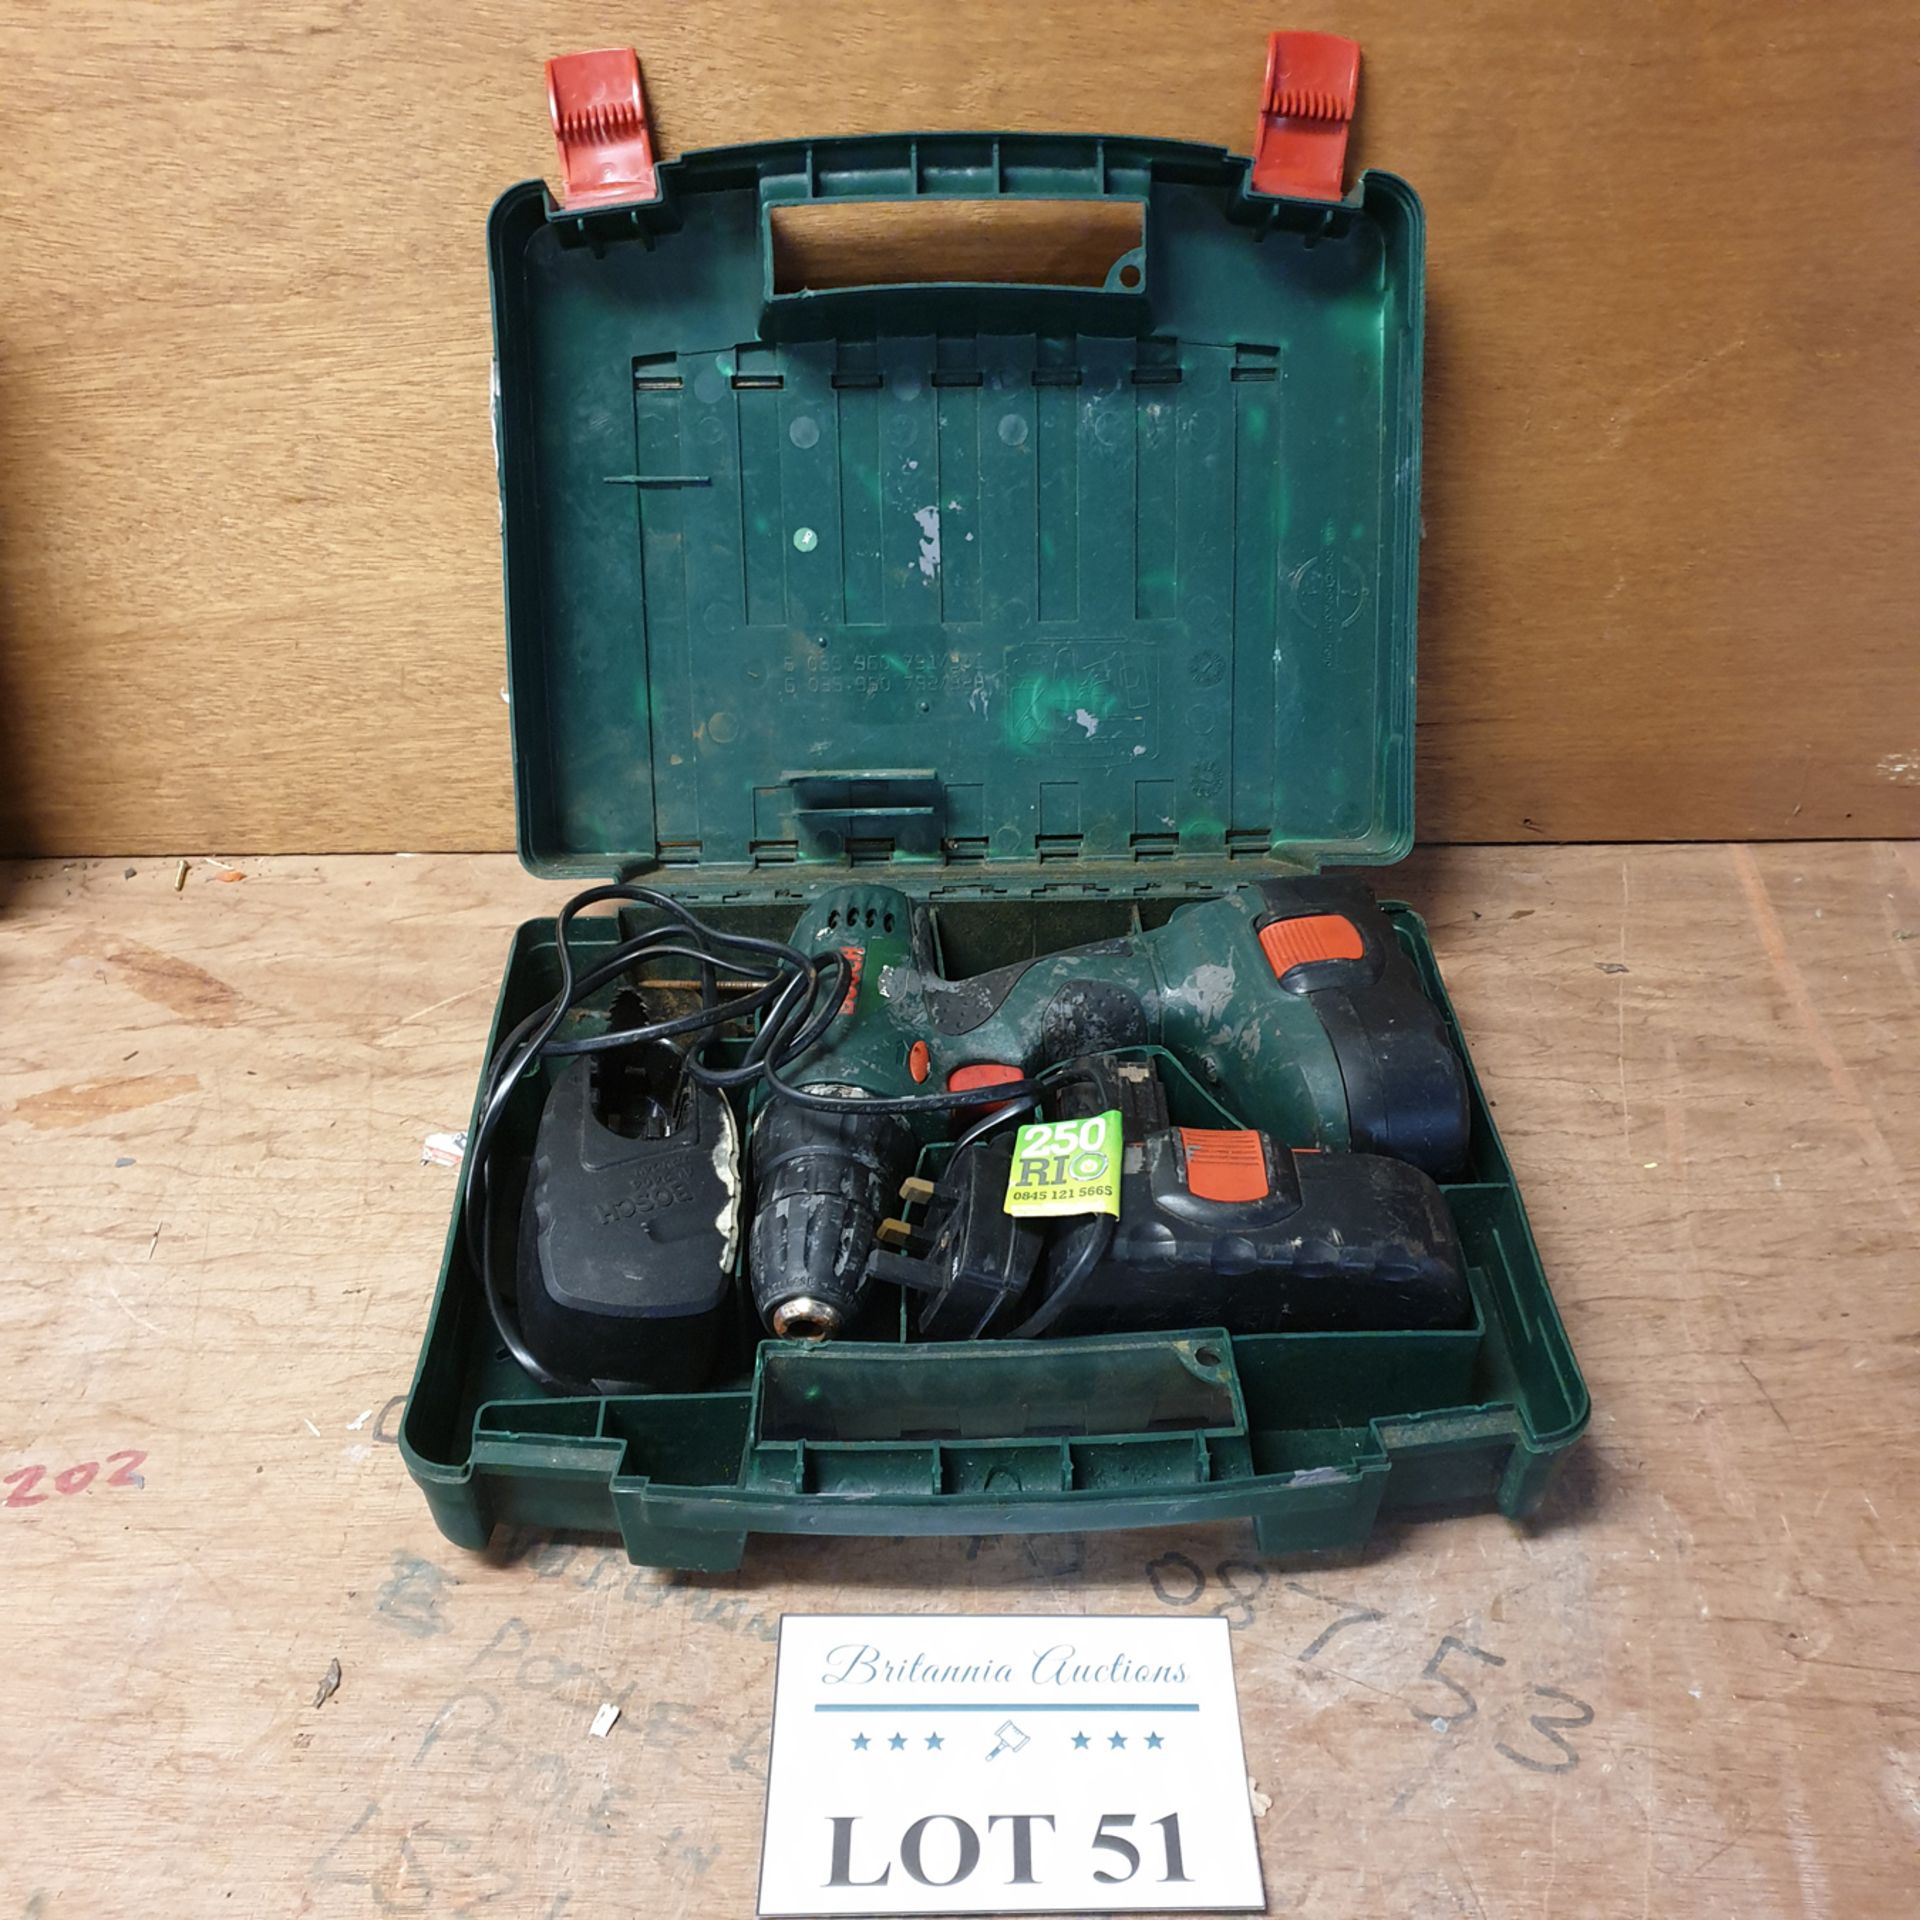 BOSCH Cordless Hand Drill with Spare Battery and Charger. Boxed.